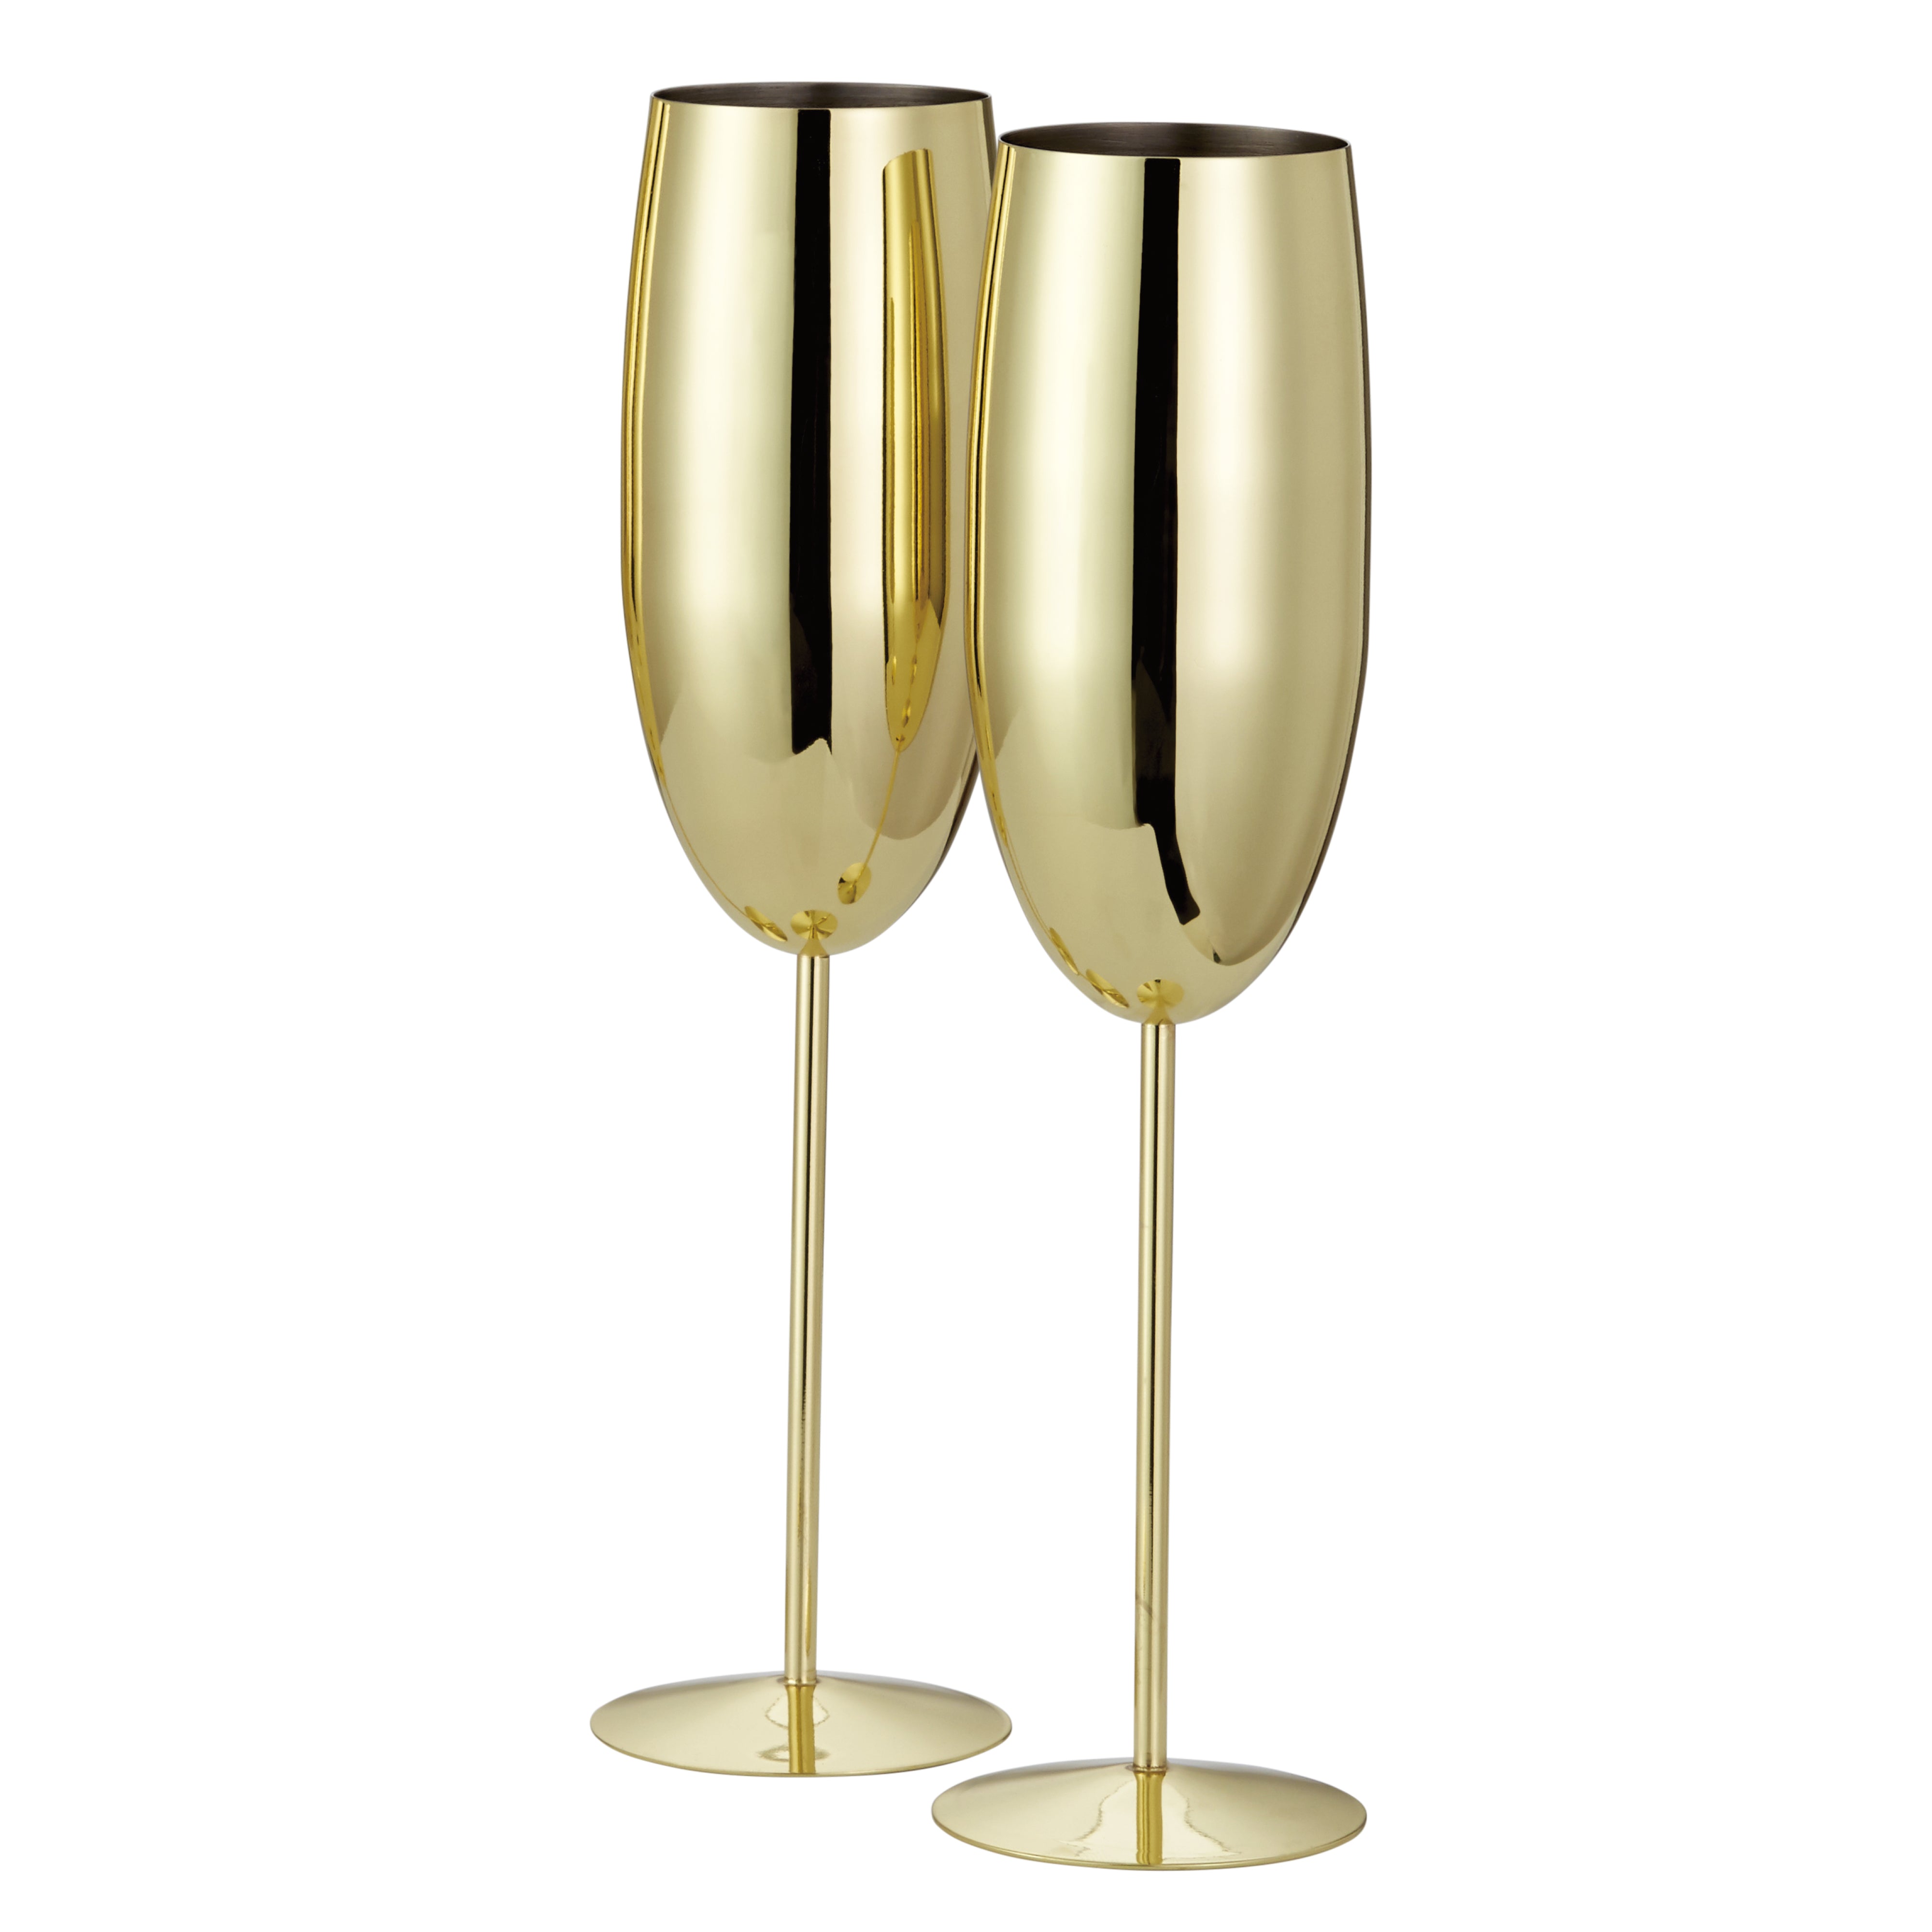 2 Gold Stainless Steel Champagne Flutes